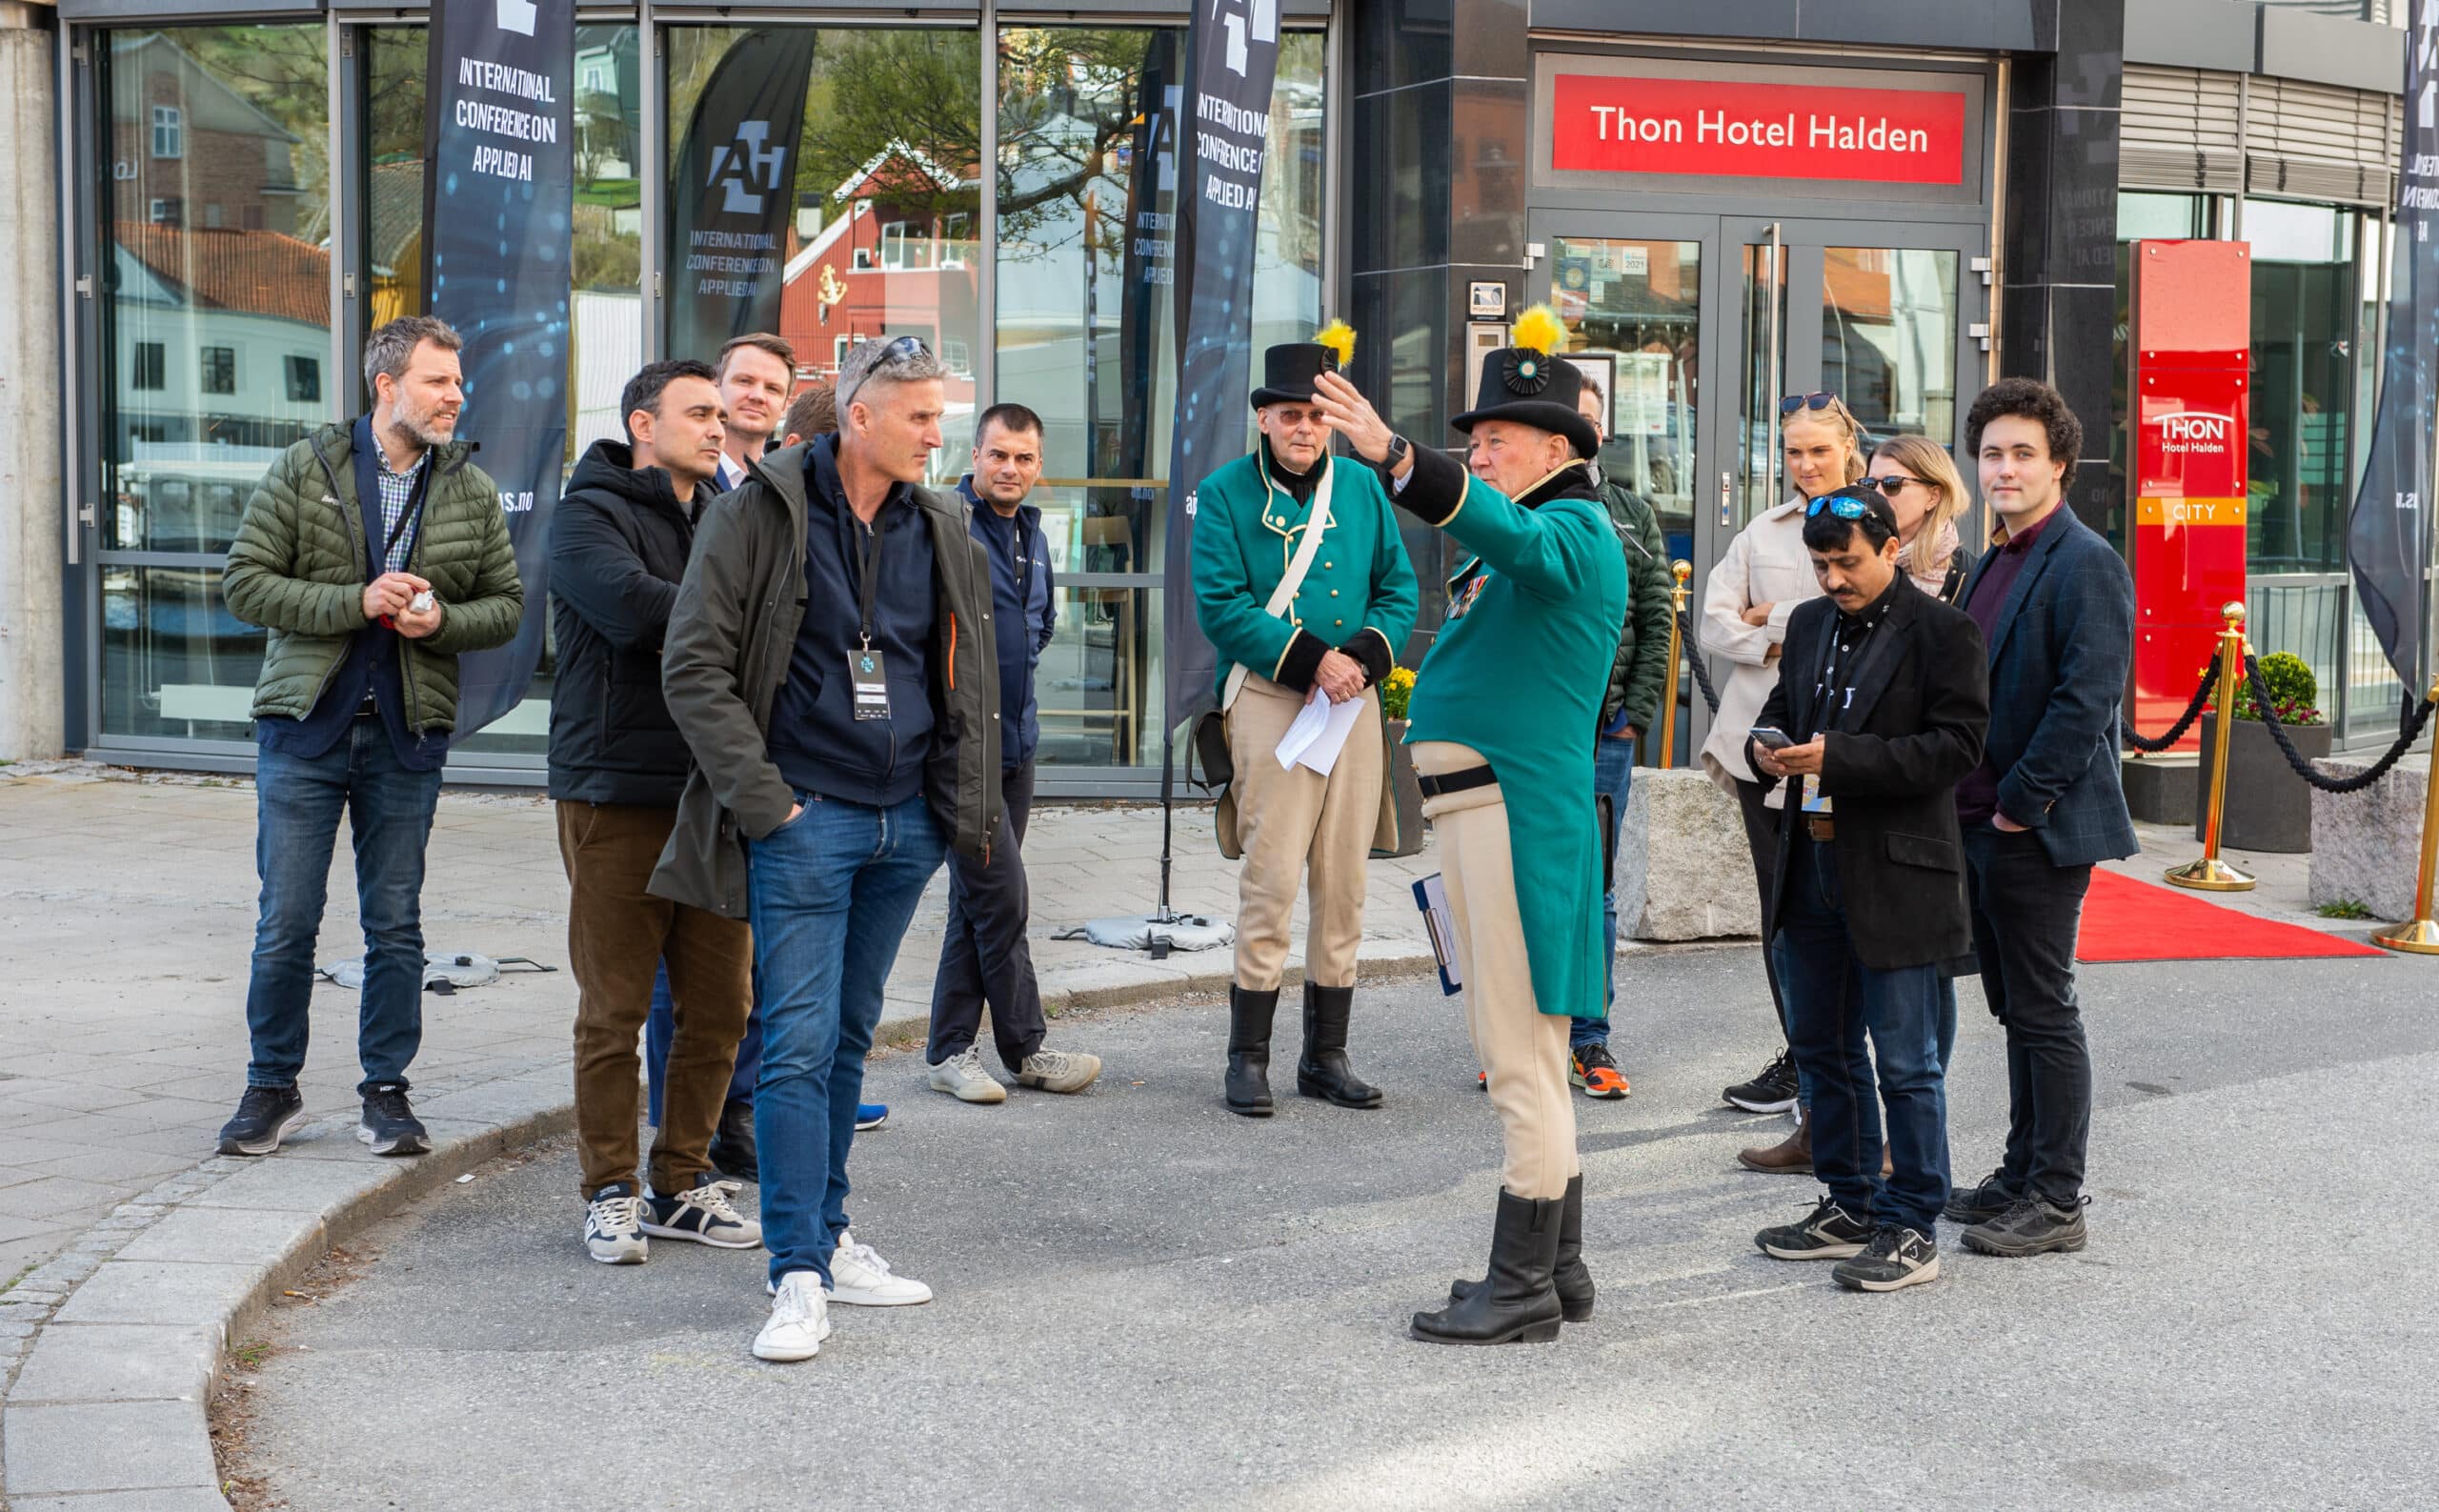 Some of the conference participants used the opportunity for a historical city tour guided by members from Fredrikshalds Borgervæpning. PHOTO: Stein Johnsen, Contentvideo.no